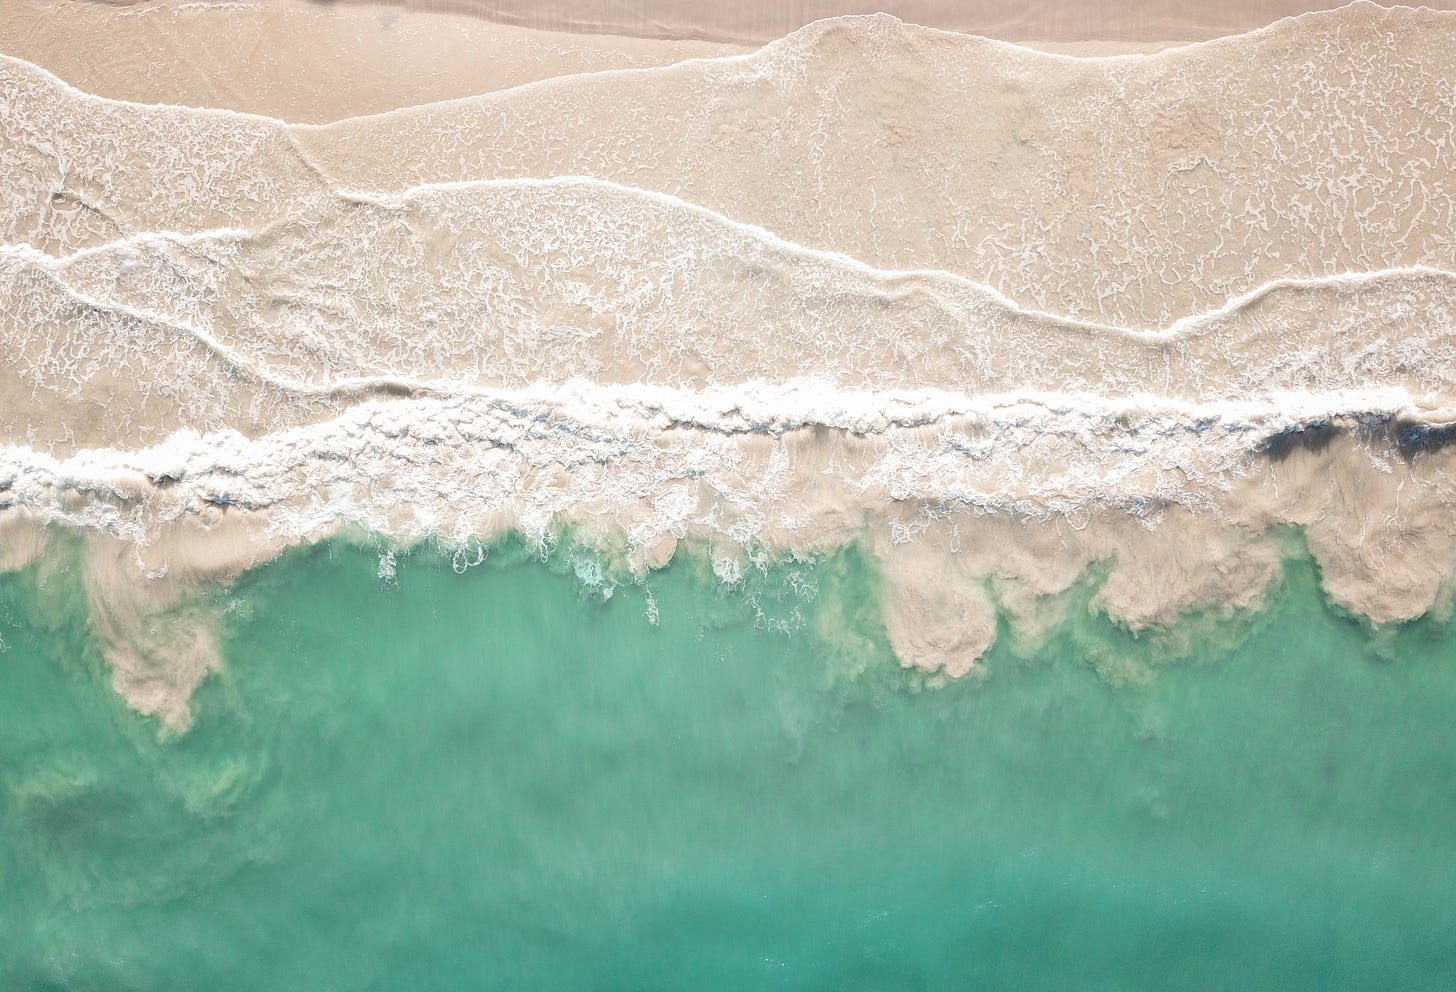 A very beautiful overhead shot of waves lapping at a beach